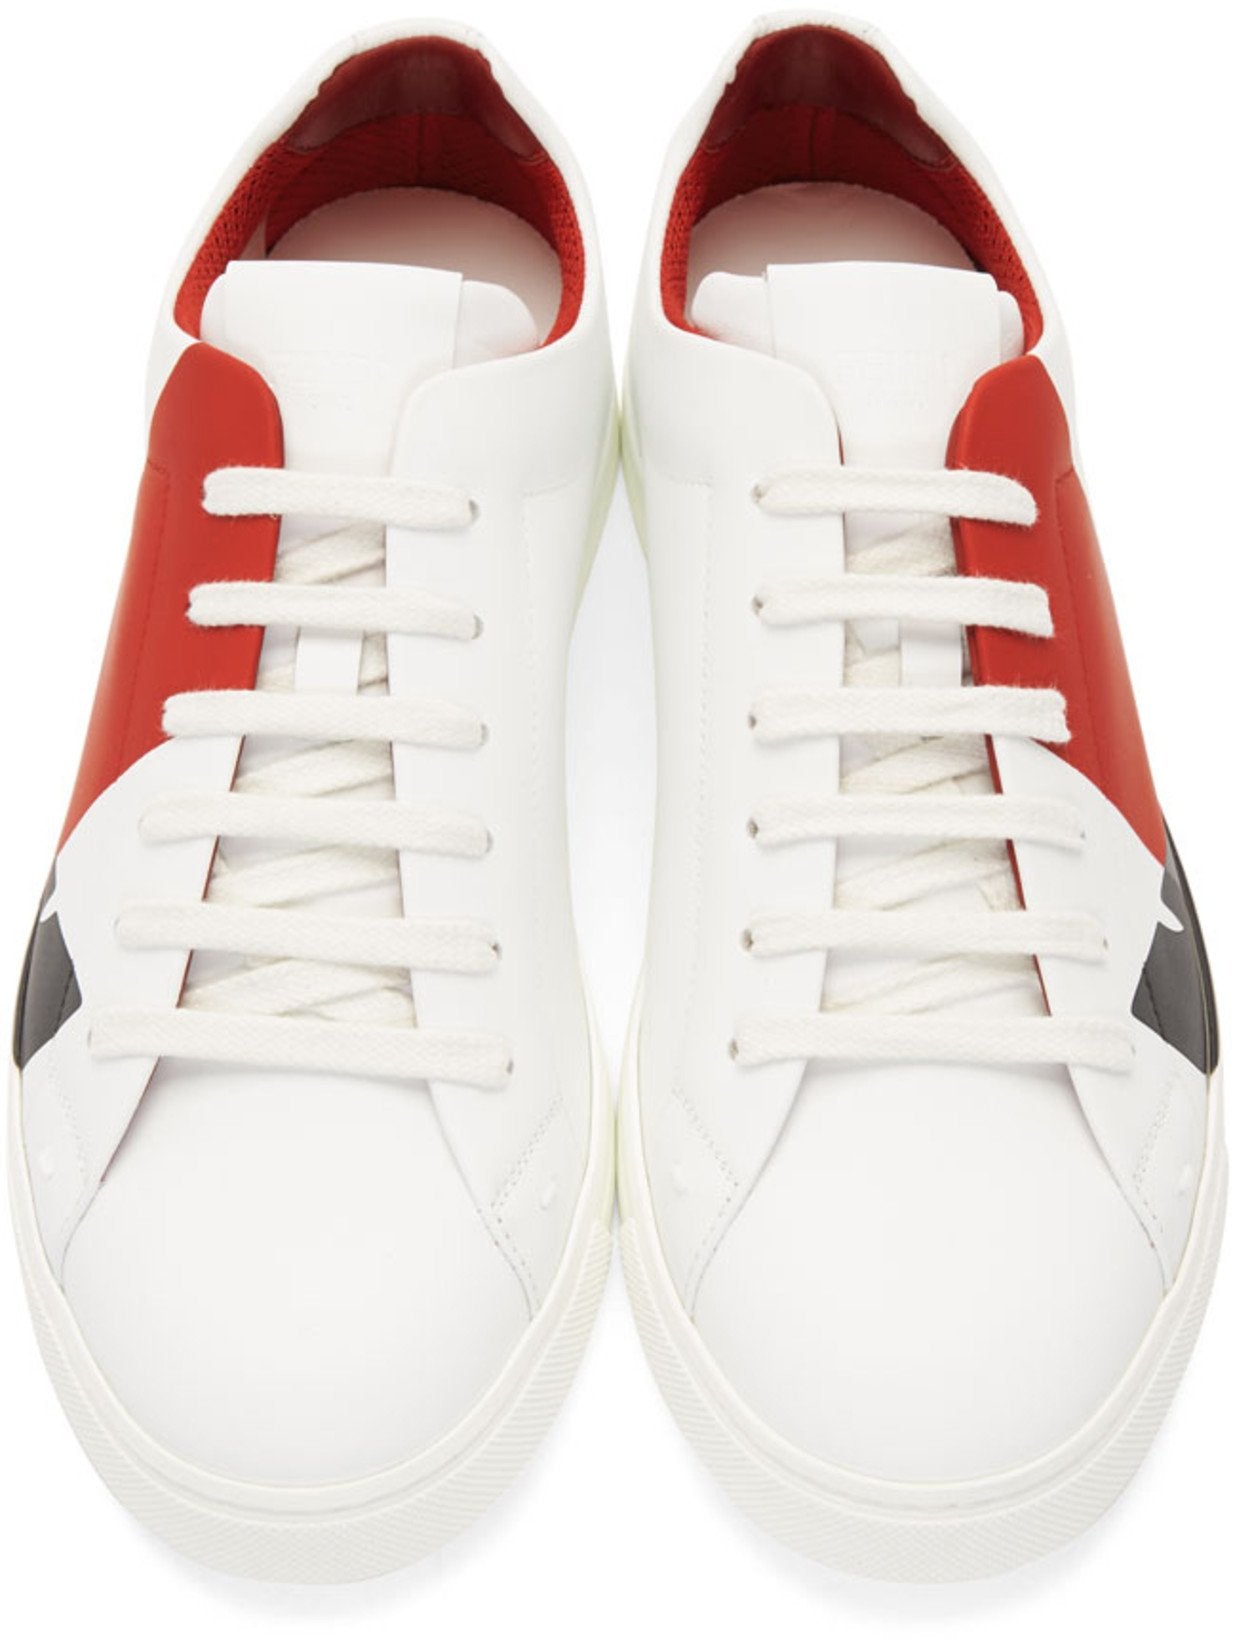 Fendi Leather 'Bag Bugs' Sneakers 'White & Red'